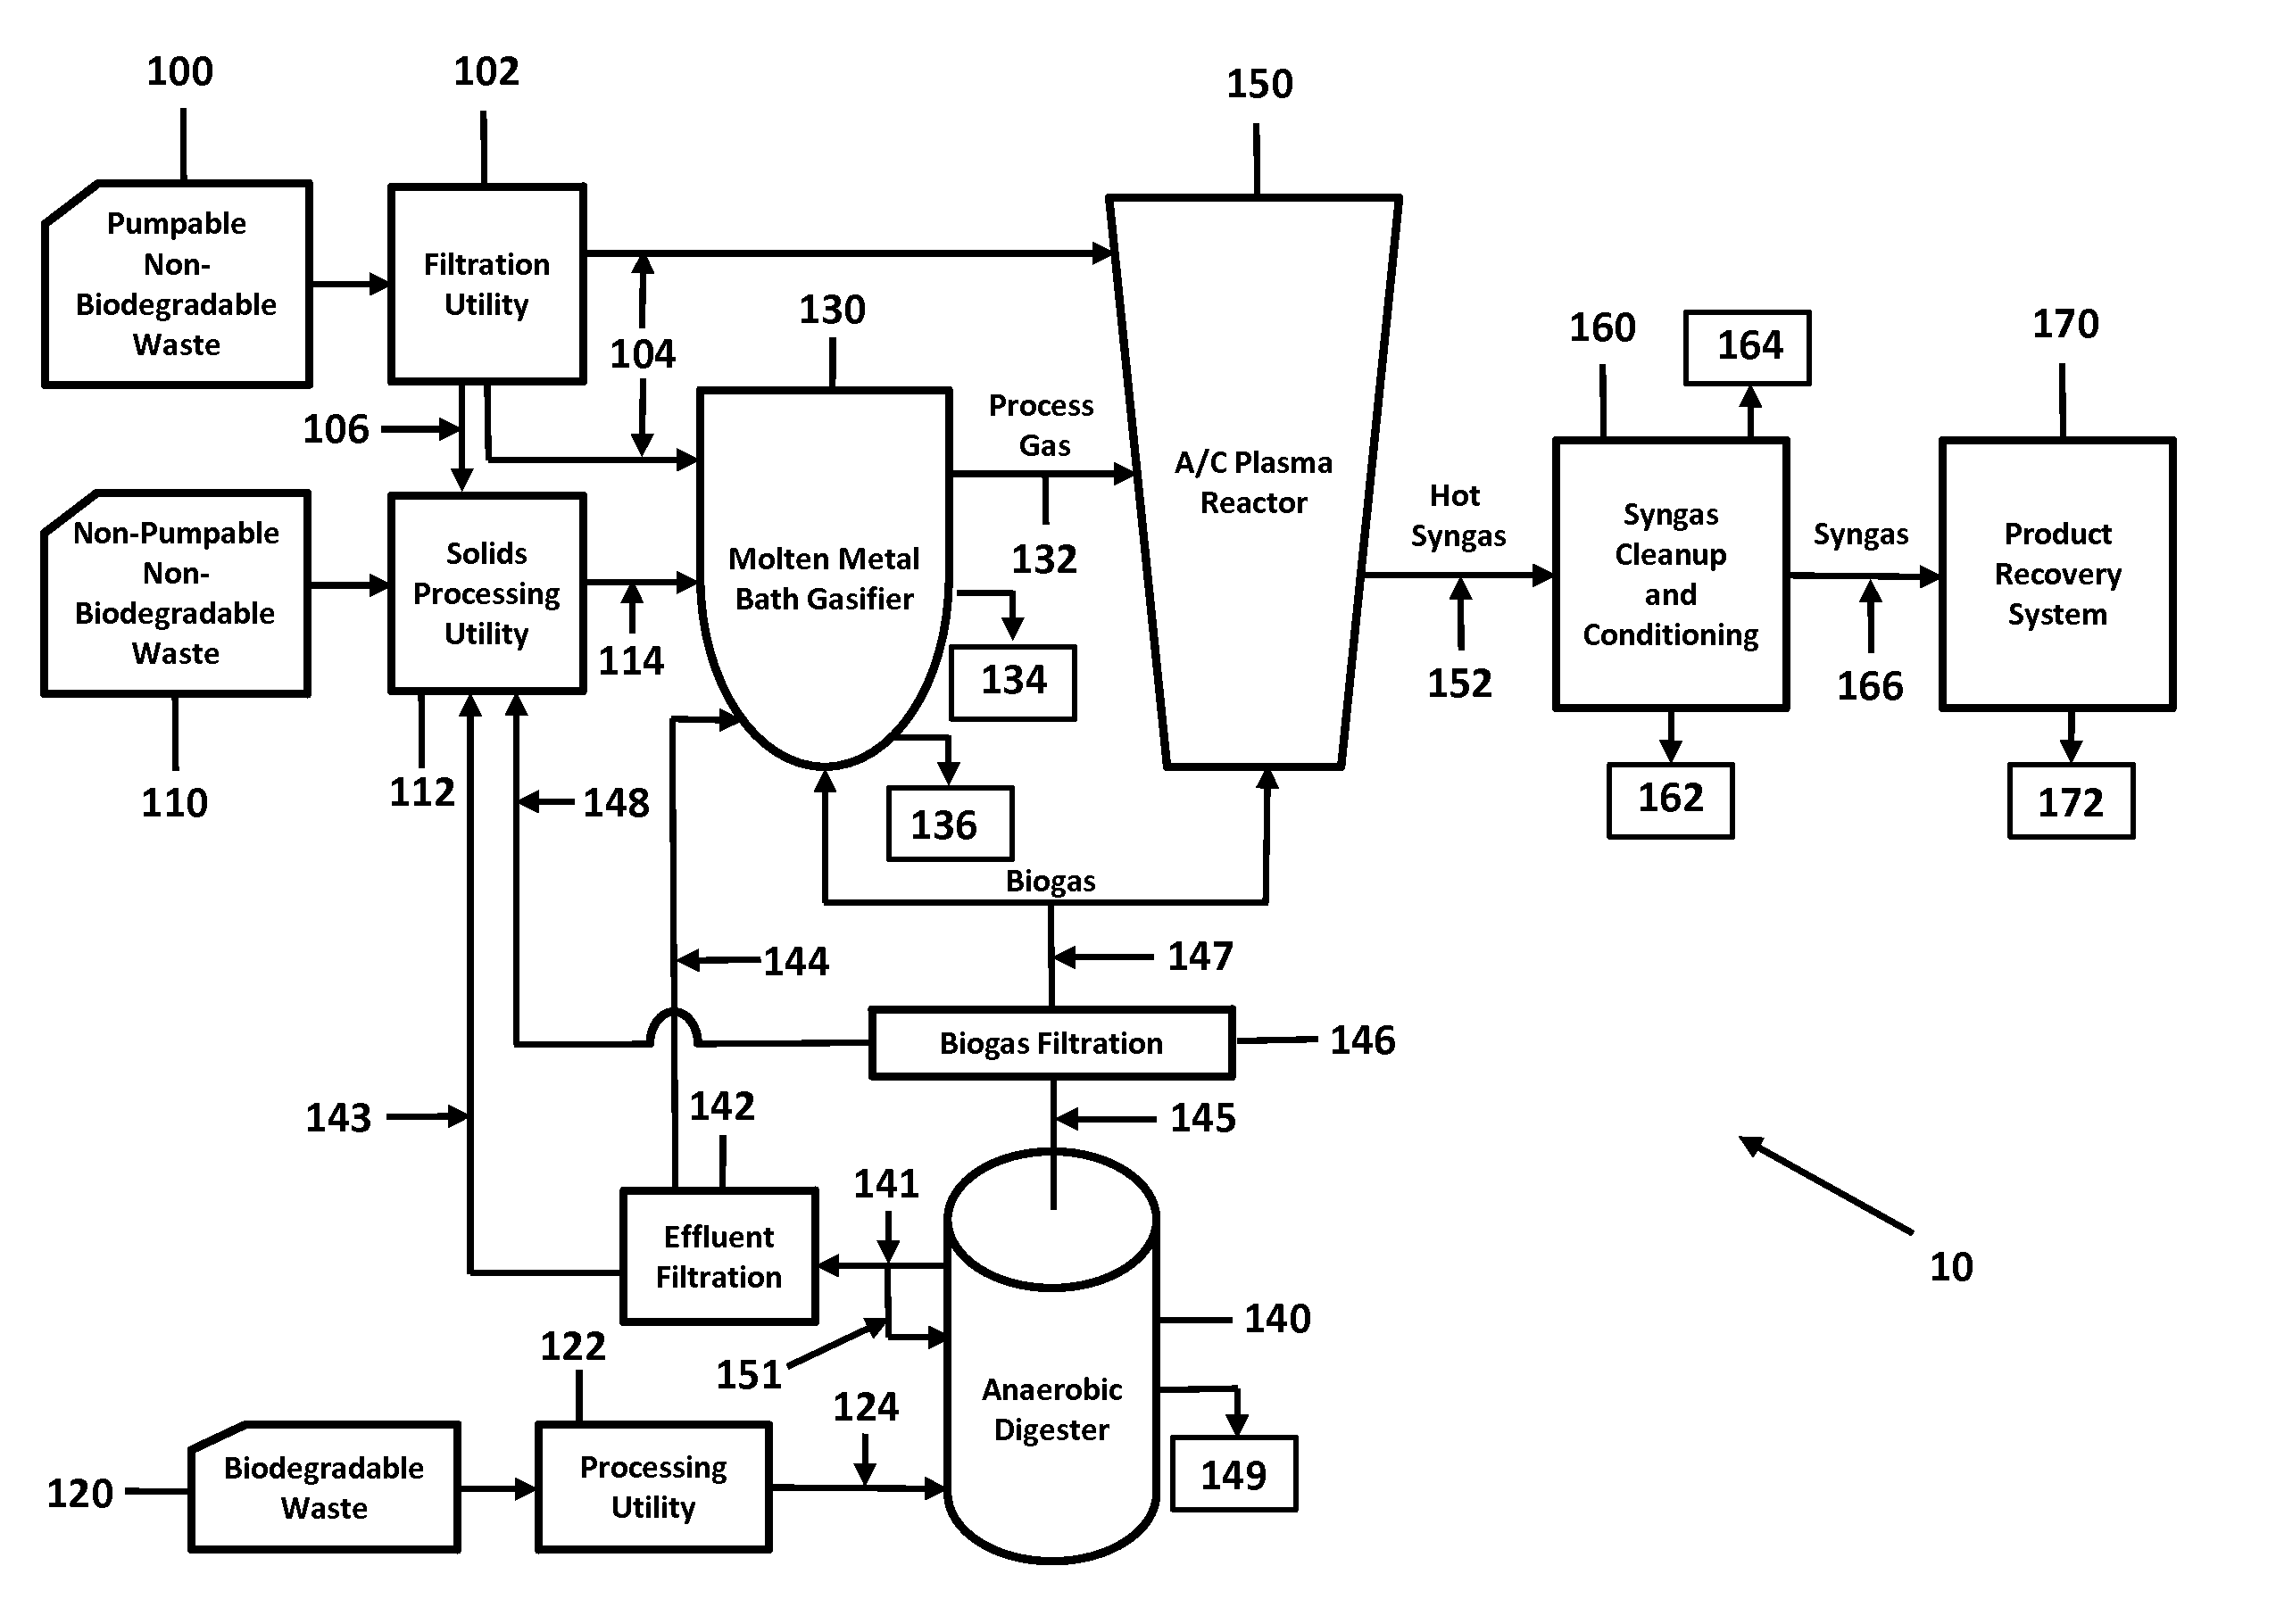 System and method for producing a consistent quality syngas from diverse waste materials with heat recovery based power generation, and renewable hydrogen co-production